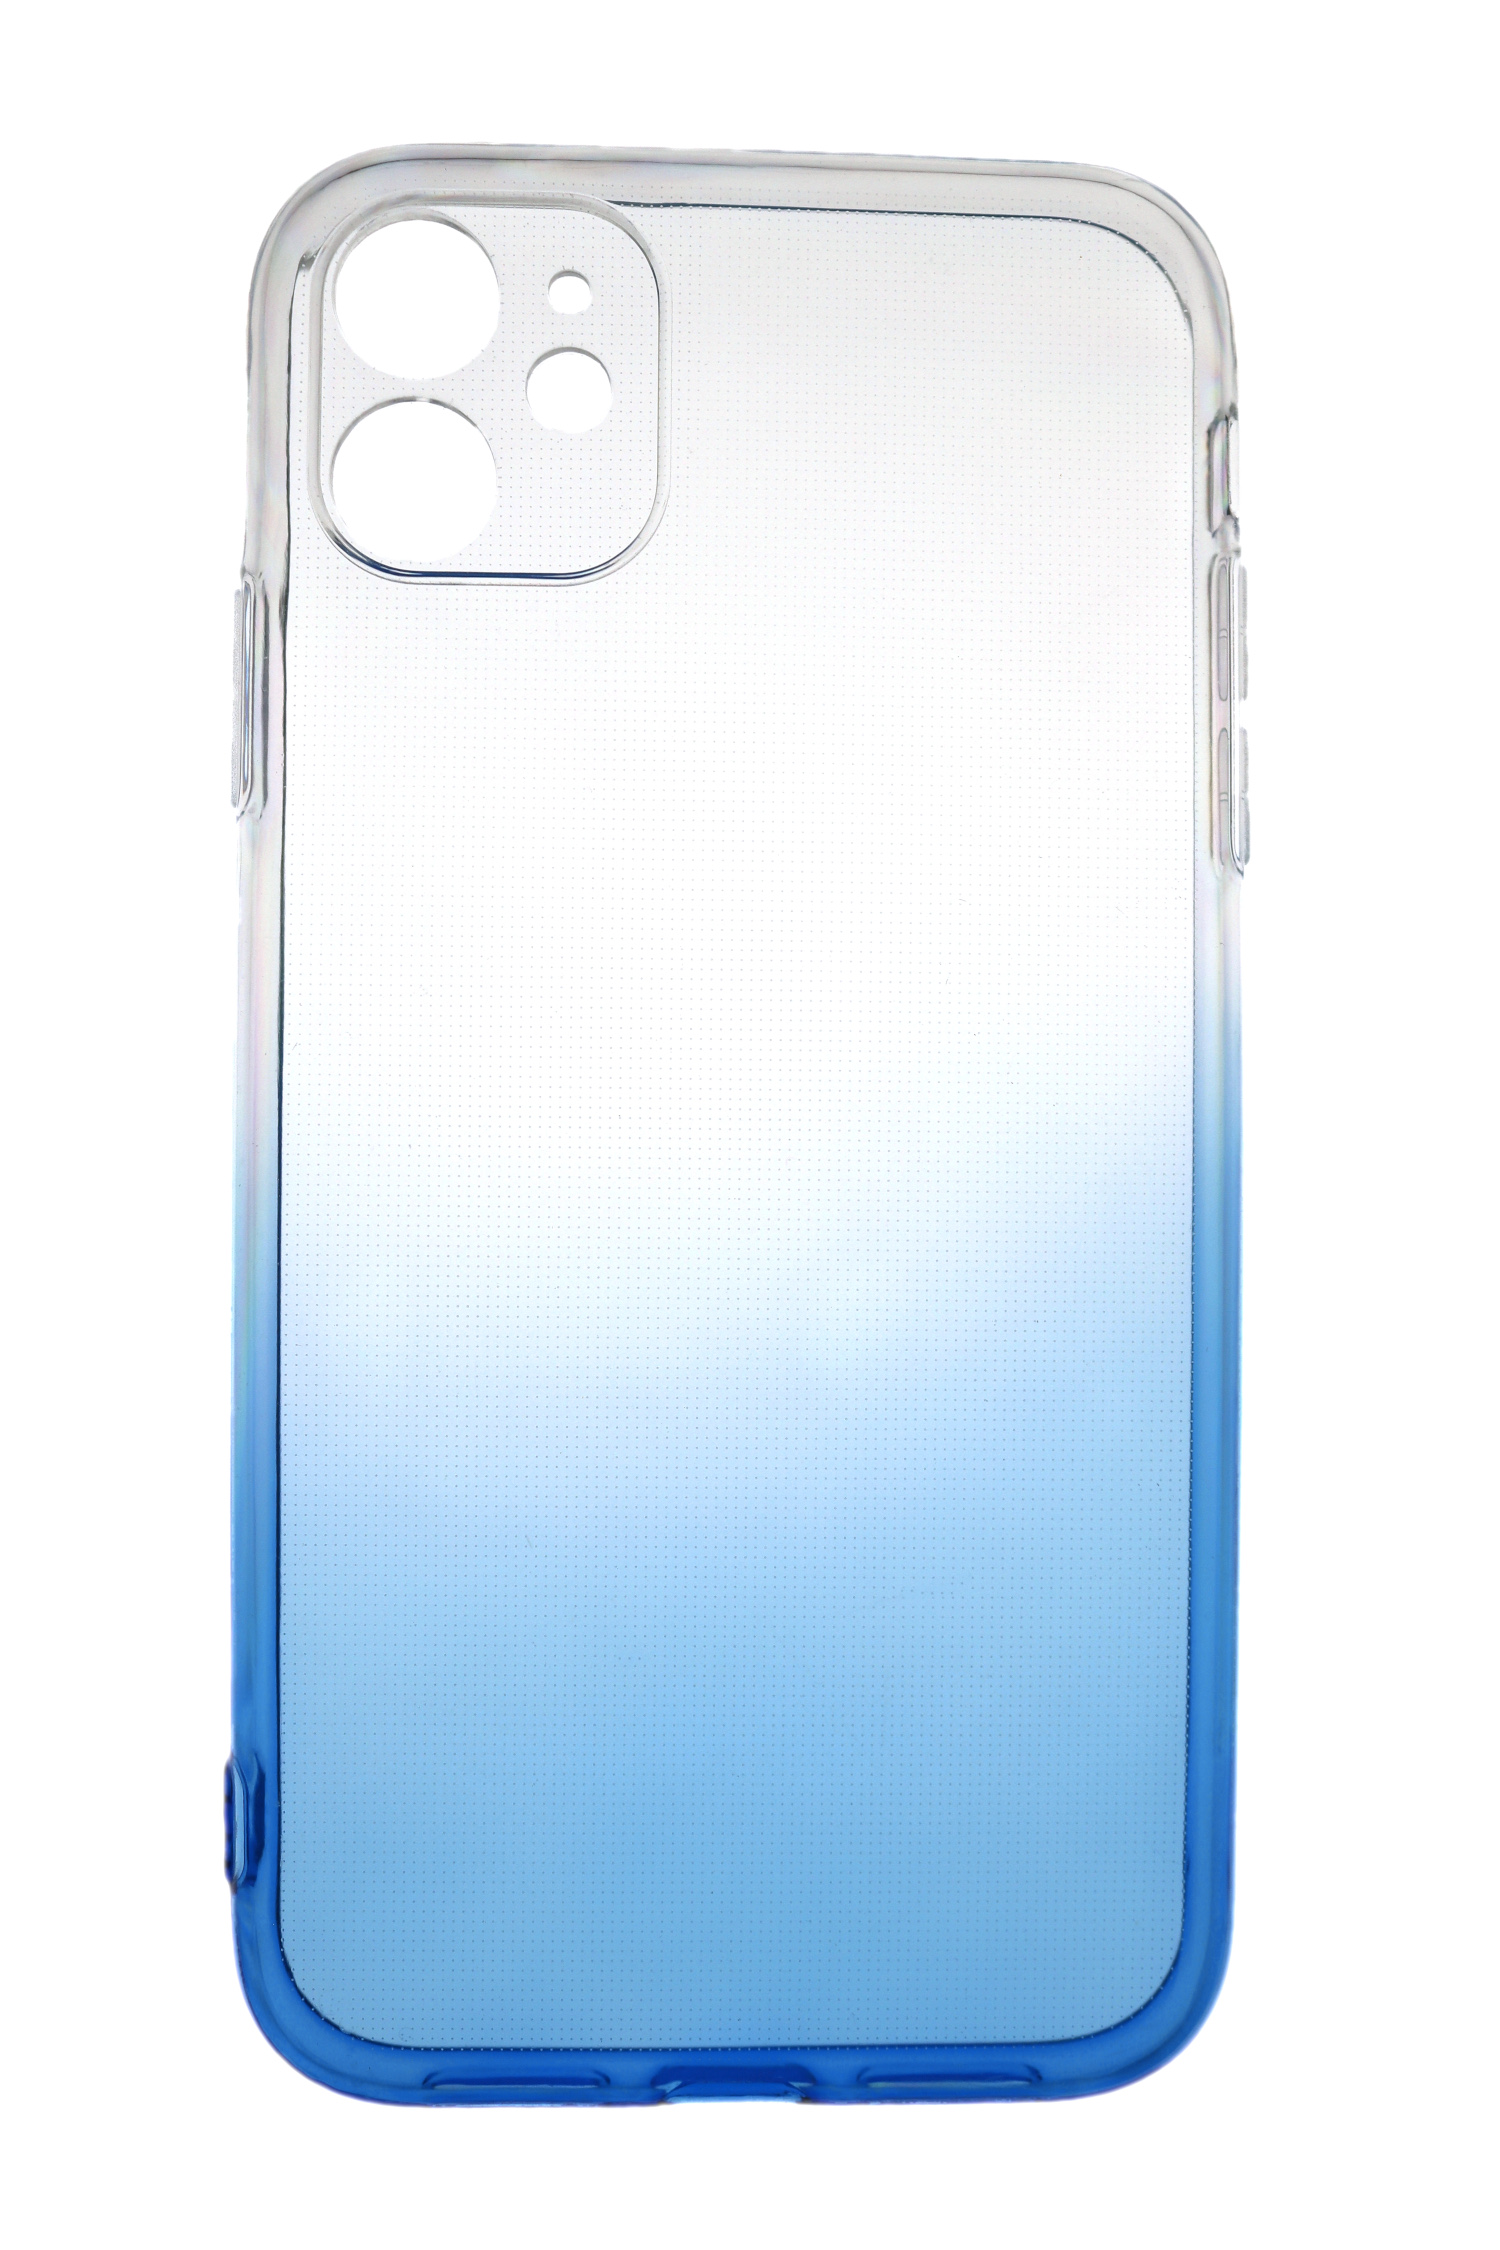 12 TPU JAMCOVER Backcover, Apple, Case mm Transparent Pro, 12, iPhone iPhone Strong, 2.0 Blau,